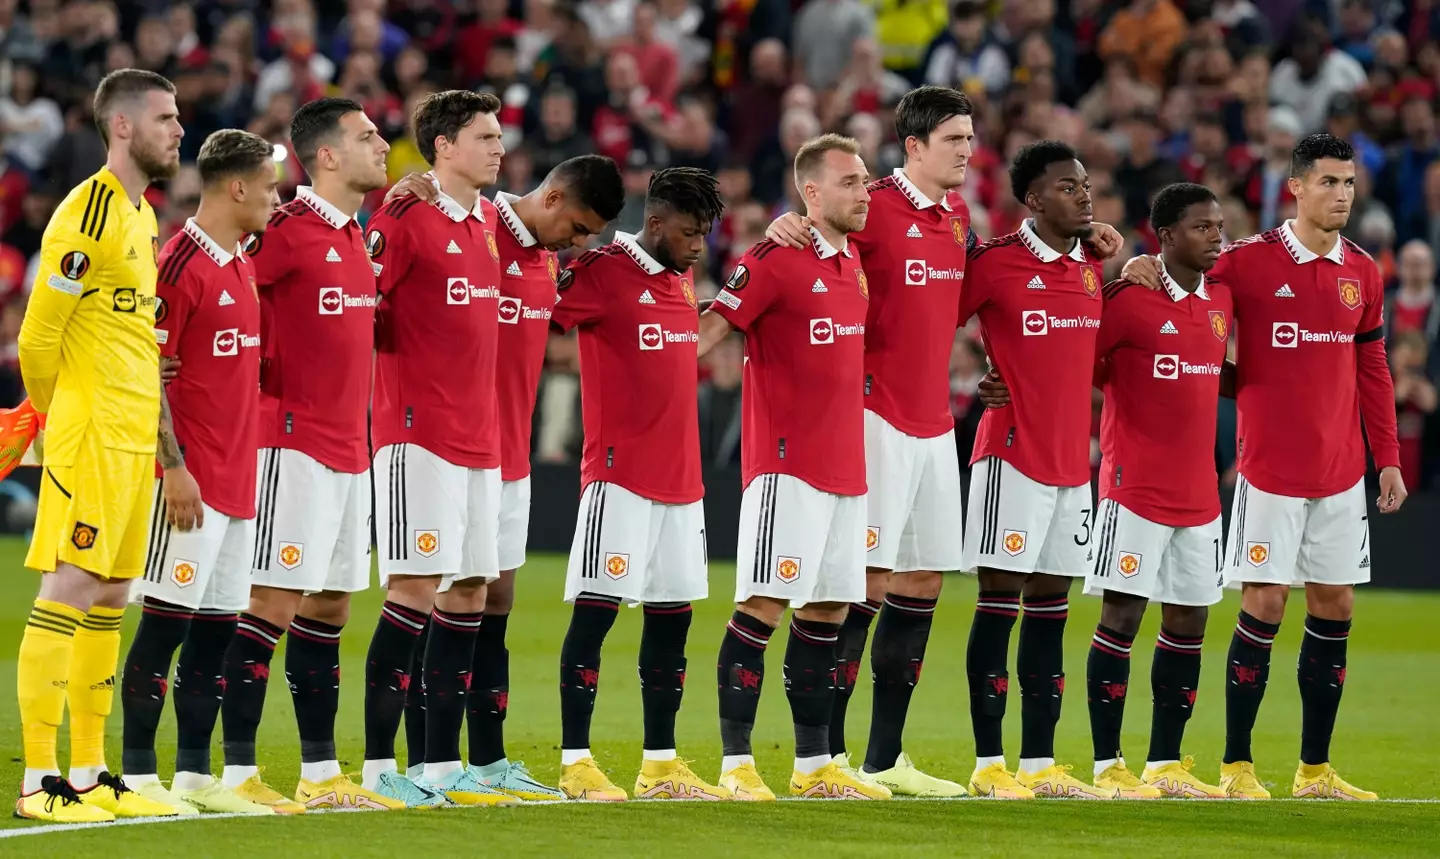 Manchester United players ahead of the game. (Image